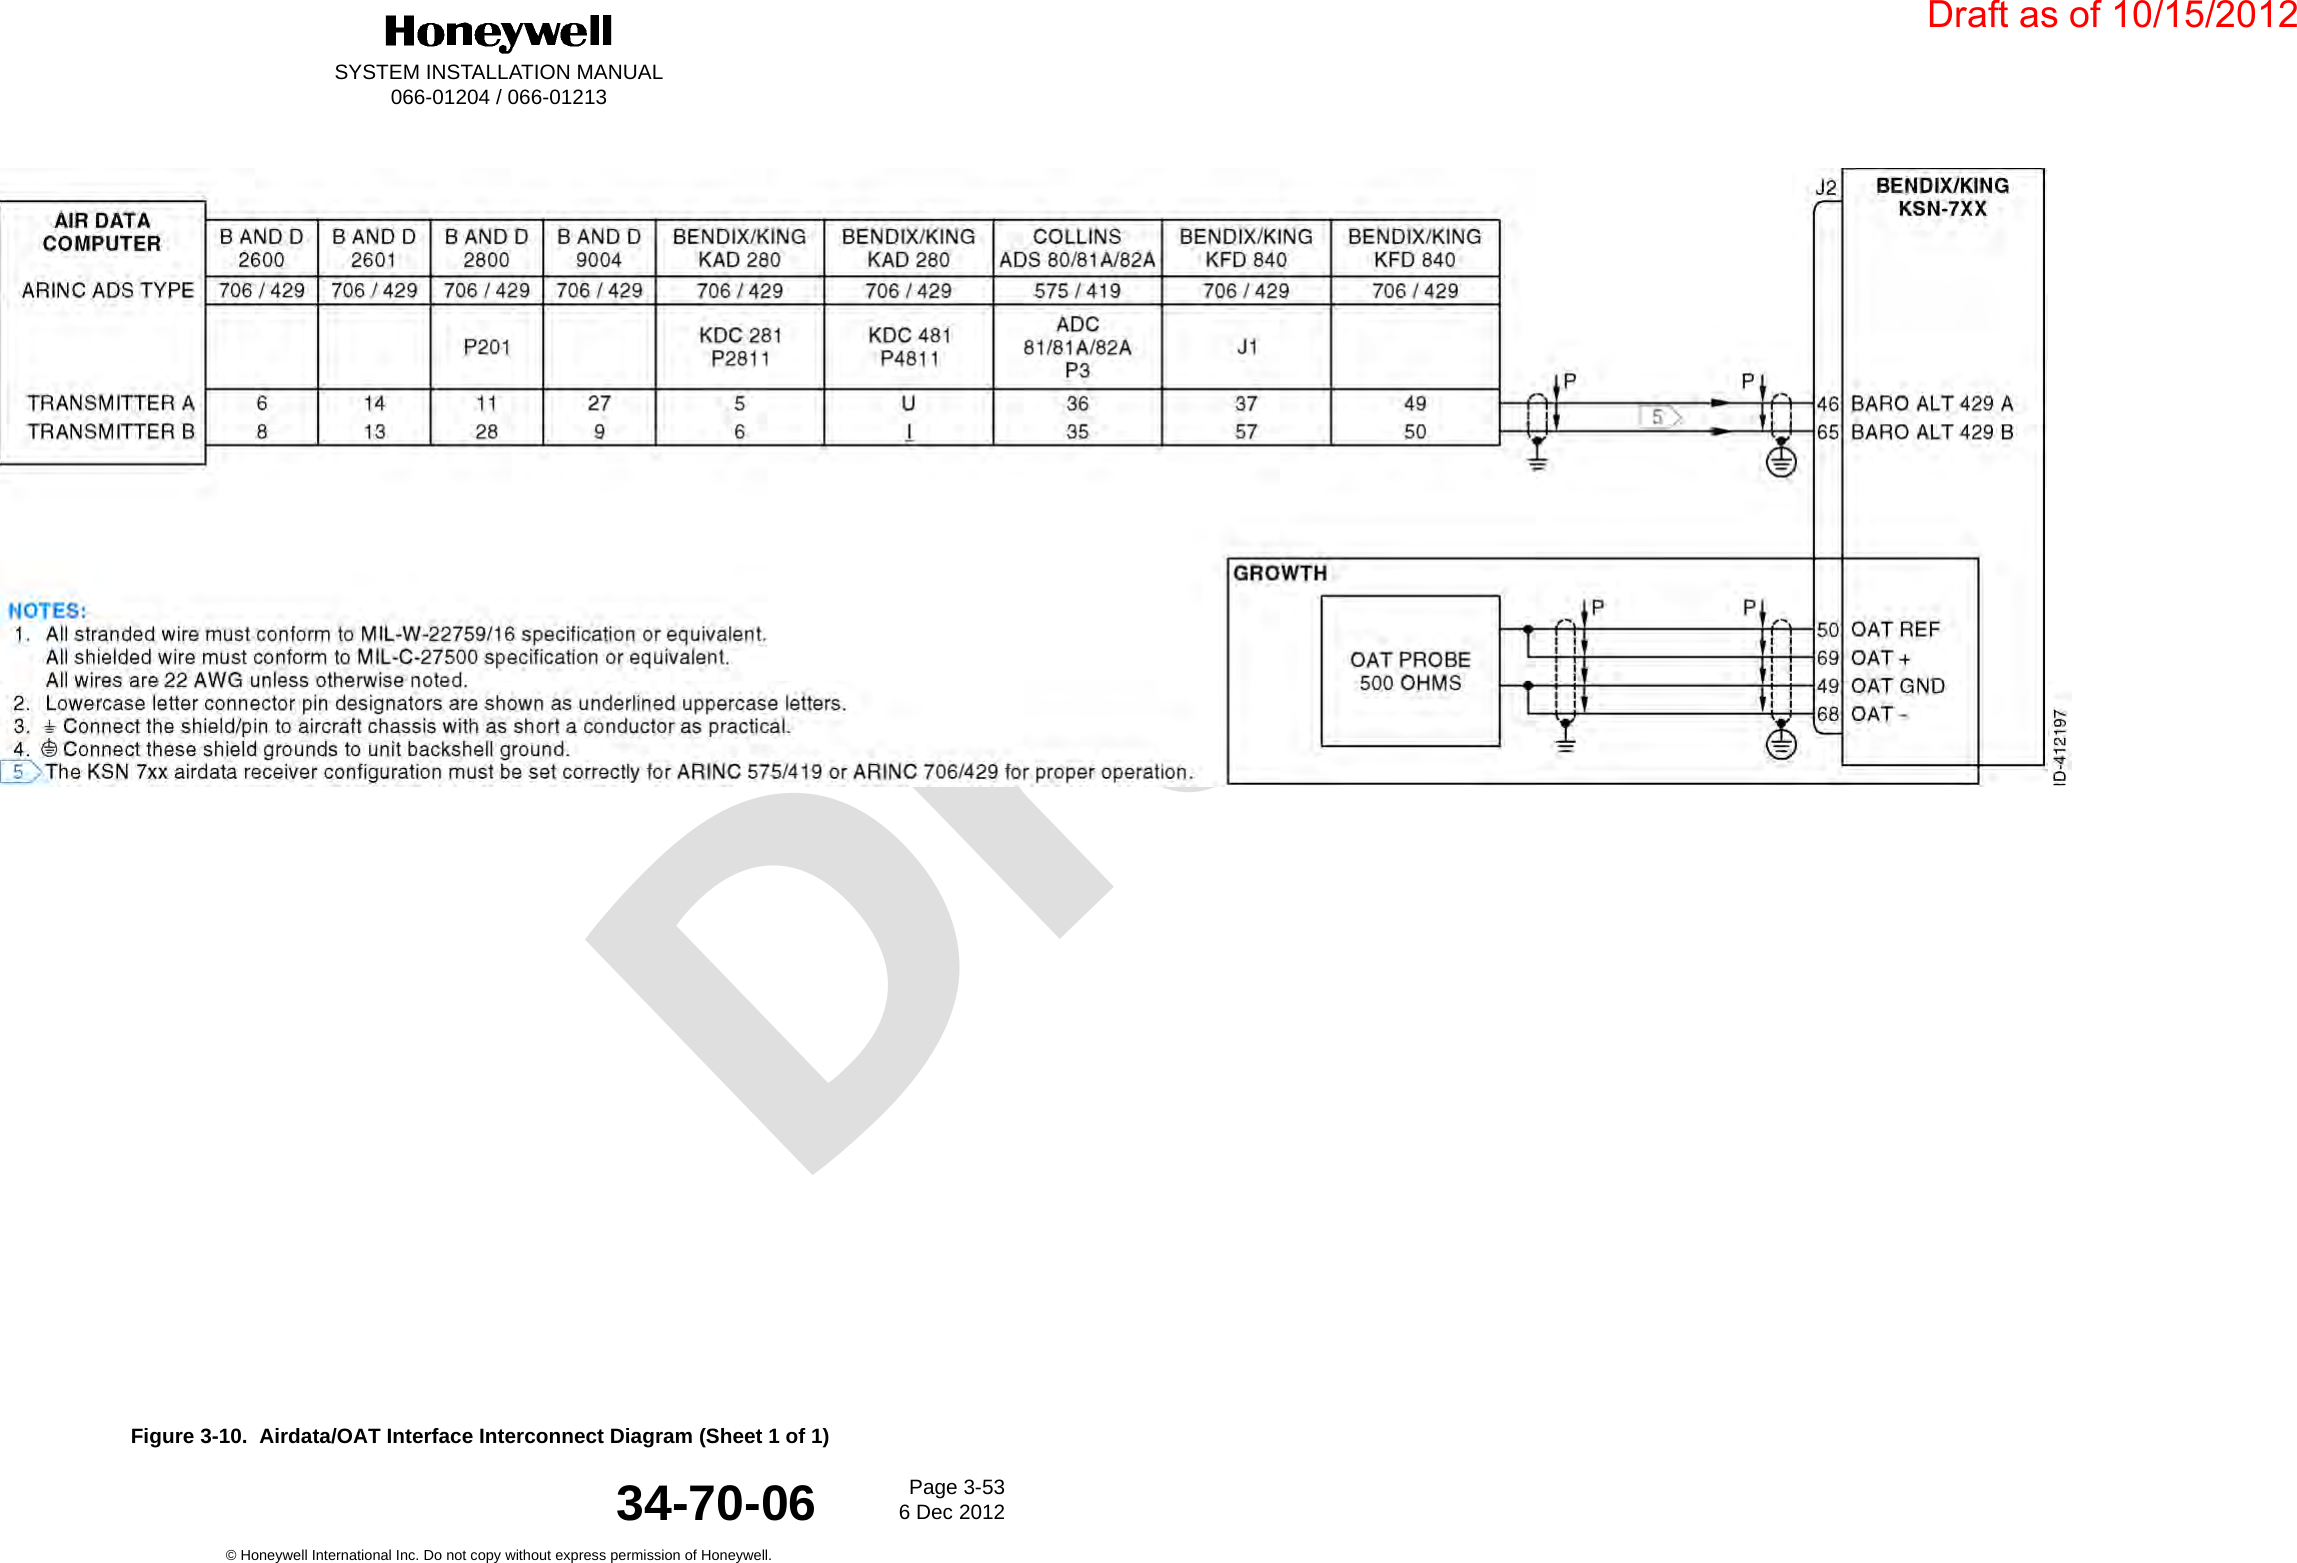 DraftSYSTEM INSTALLATION MANUAL066-01204 / 066-01213Page 3-536 Dec 2012© Honeywell International Inc. Do not copy without express permission of Honeywell.34-70-06Figure 3-10.  Airdata/OAT Interface Interconnect Diagram (Sheet 1 of 1)Draft as of 10/15/2012